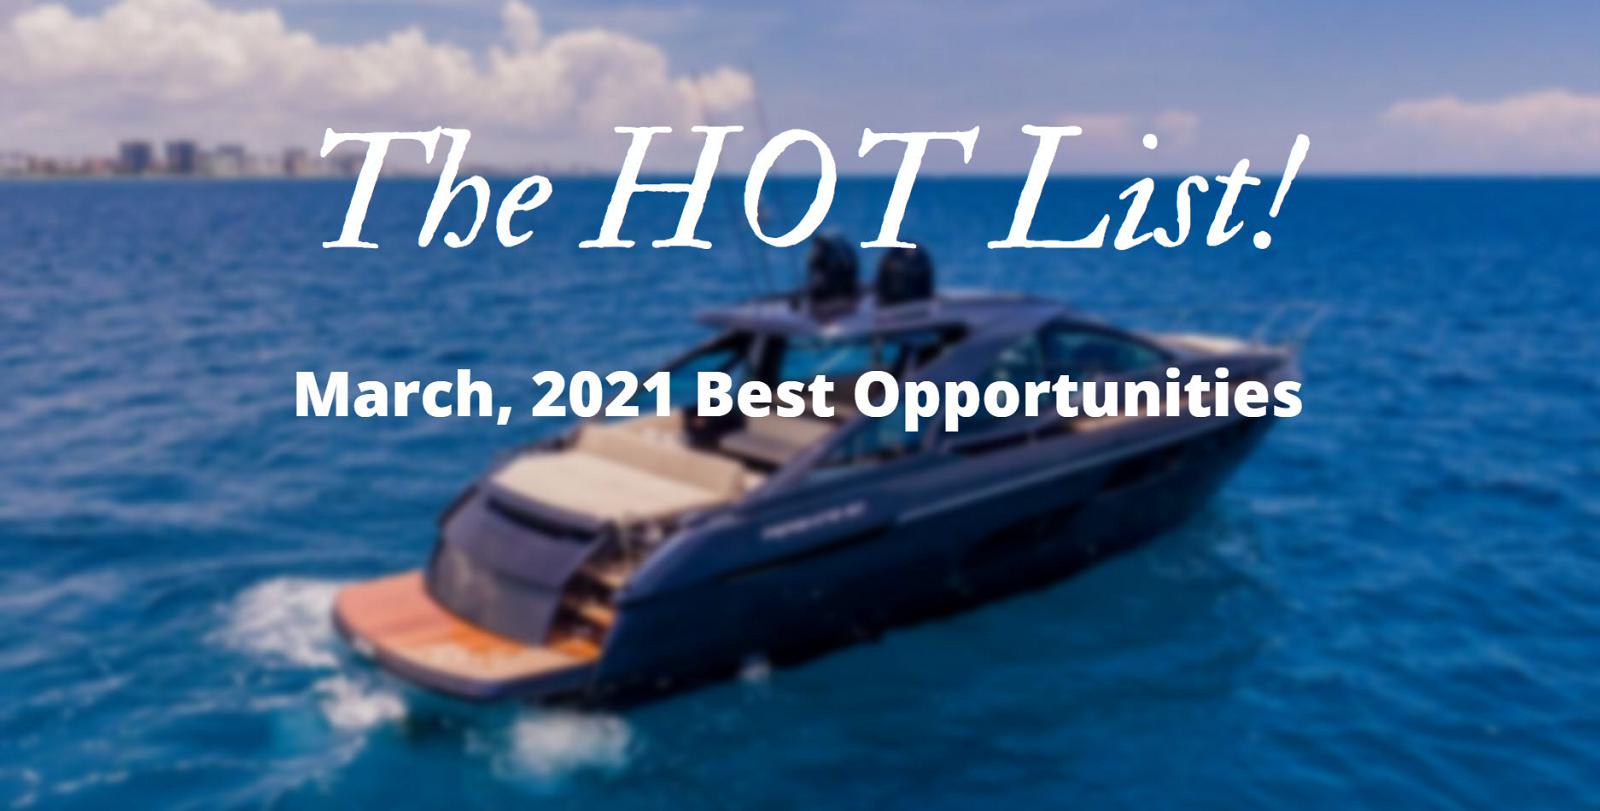 photo of The Hot List - March 2021